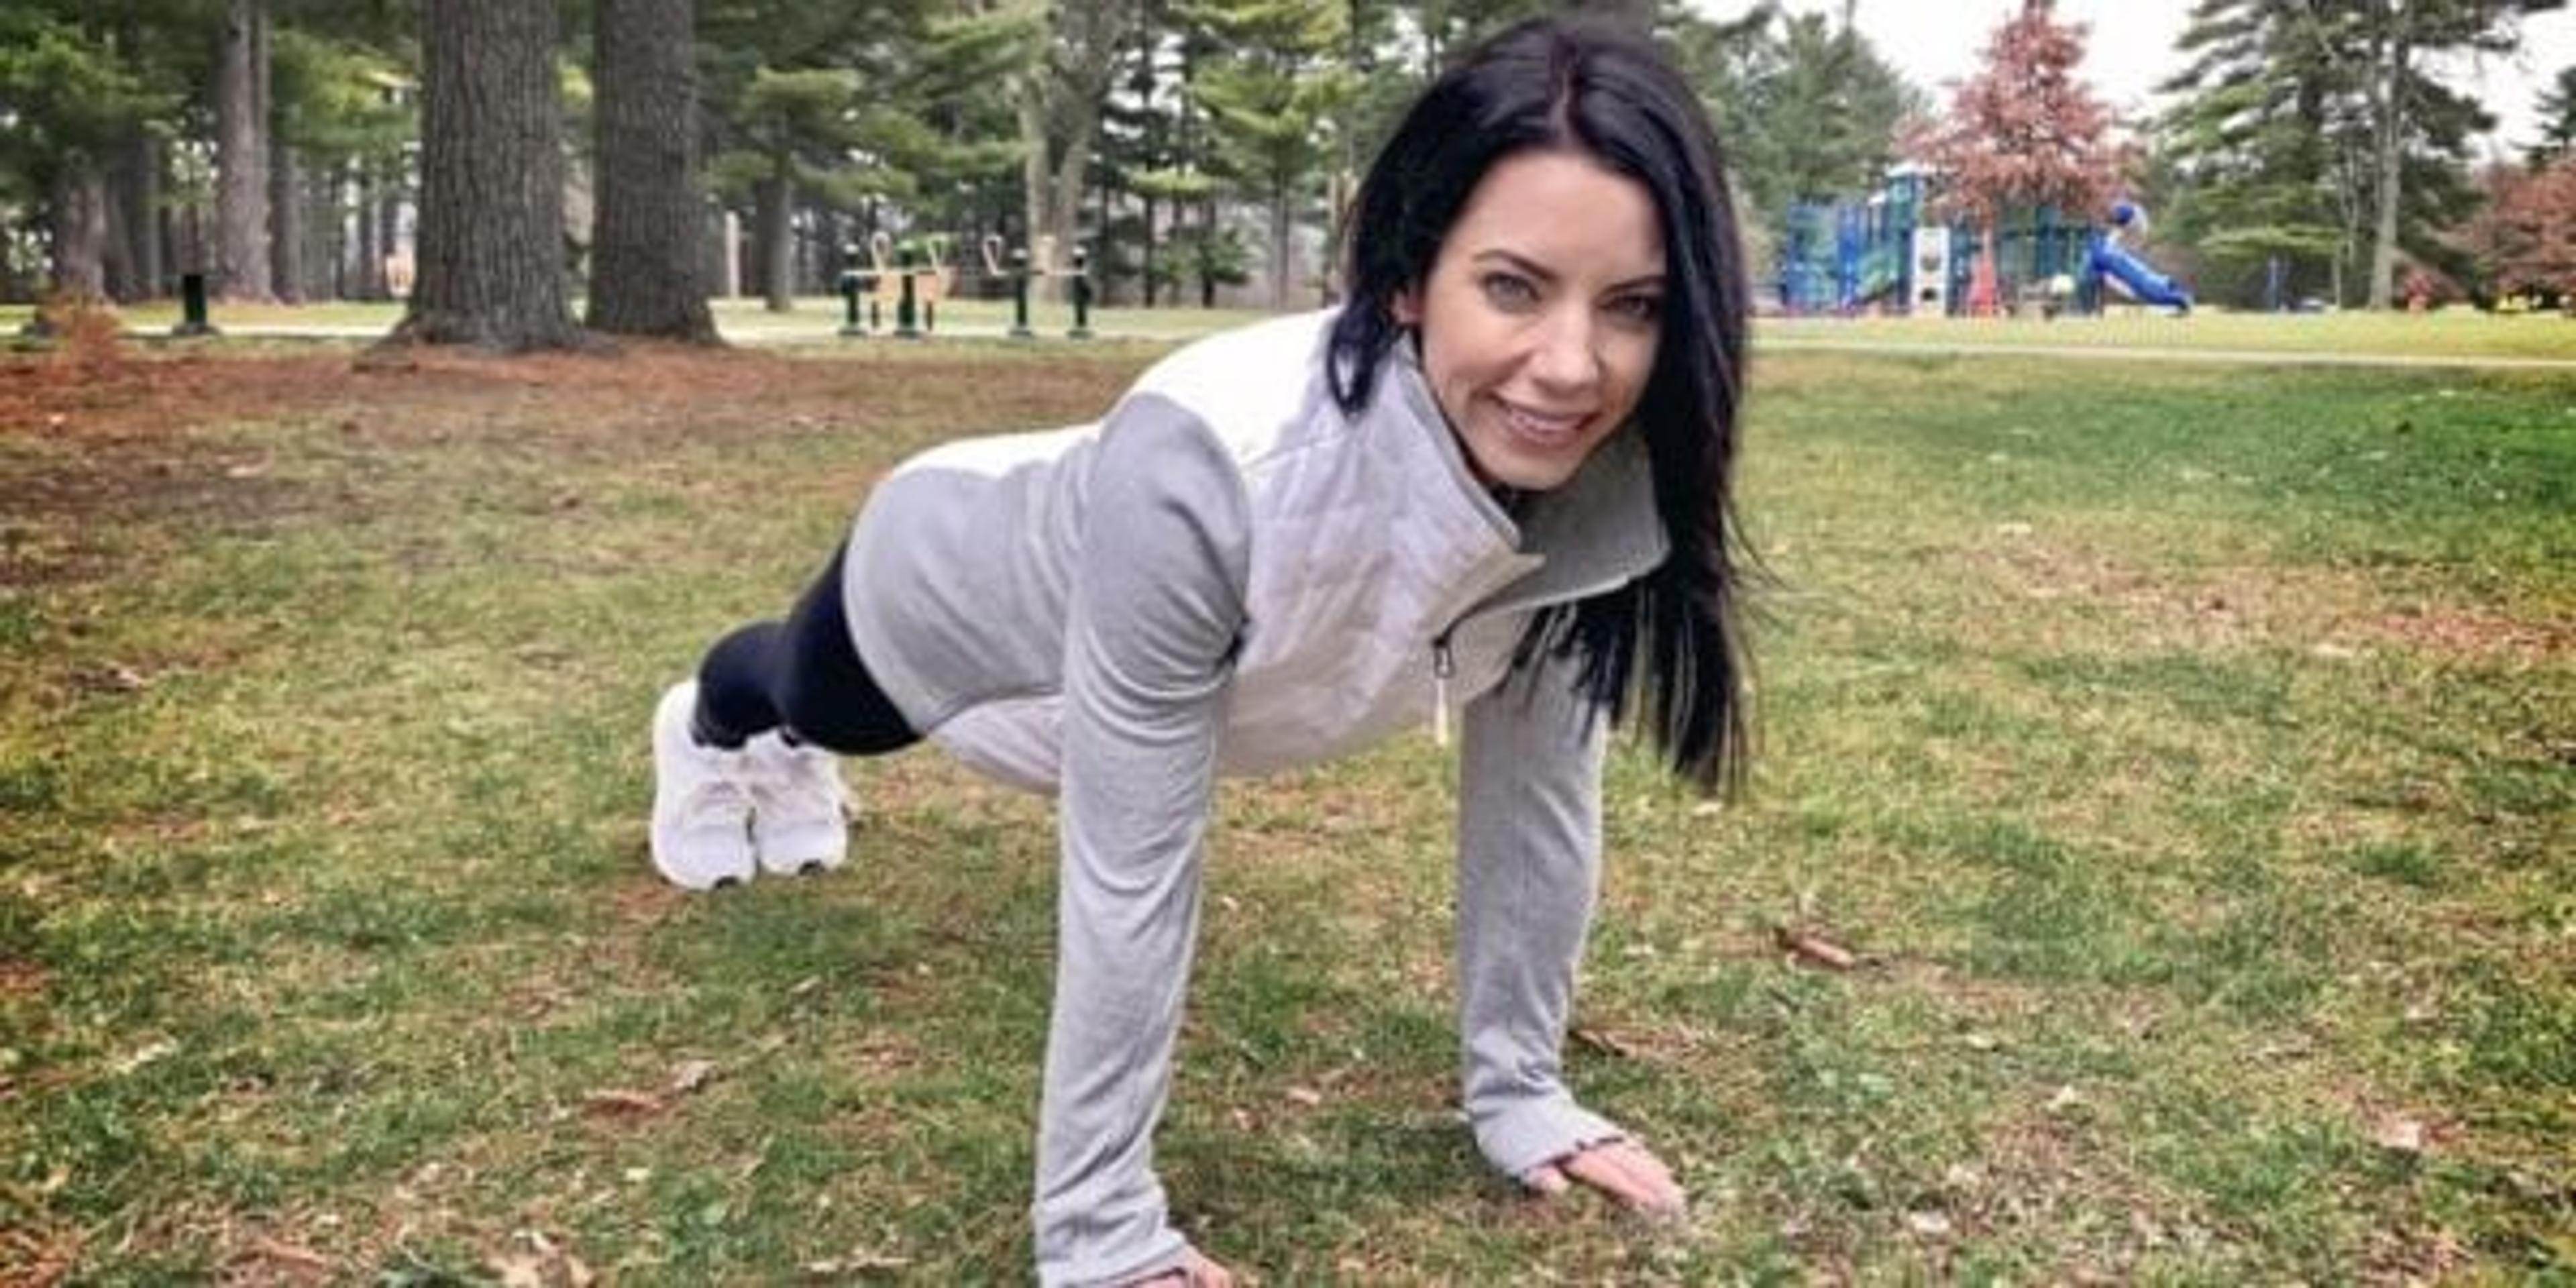 Ann Marie Wakula demonstrates a workout in a park.